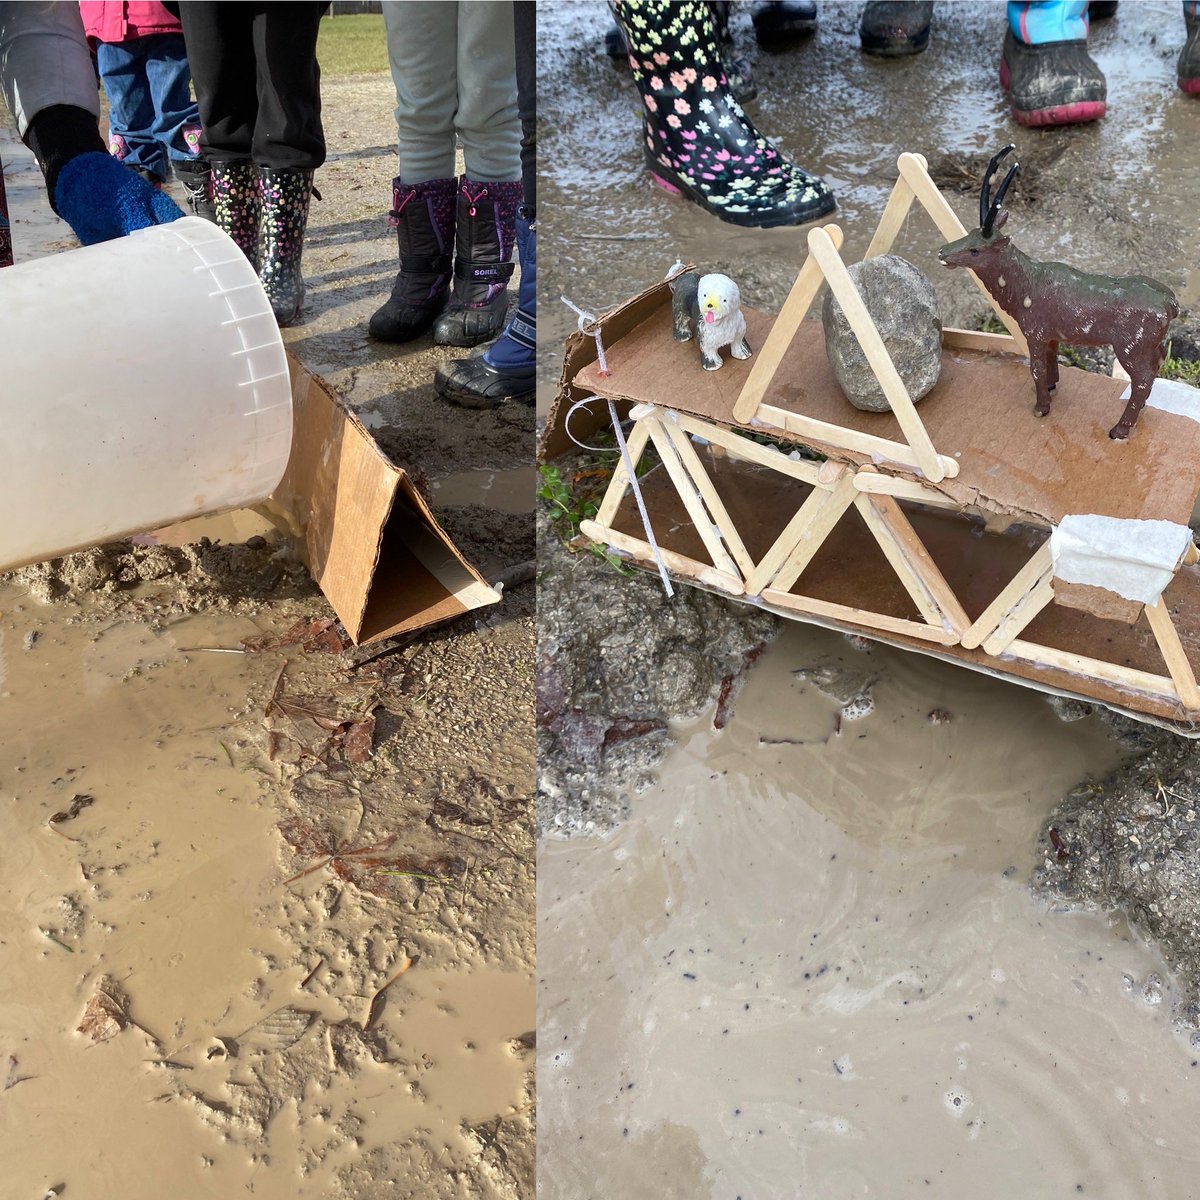 Took a refreshing walk in the forest and looked for examples of erosion in the community. Ss worked hard to build bridges for animals and people, that could withstand natural forces. One S: “I had so much joy walking and talking with my friends!” #outdoorlearning @TDSB_BandBPS